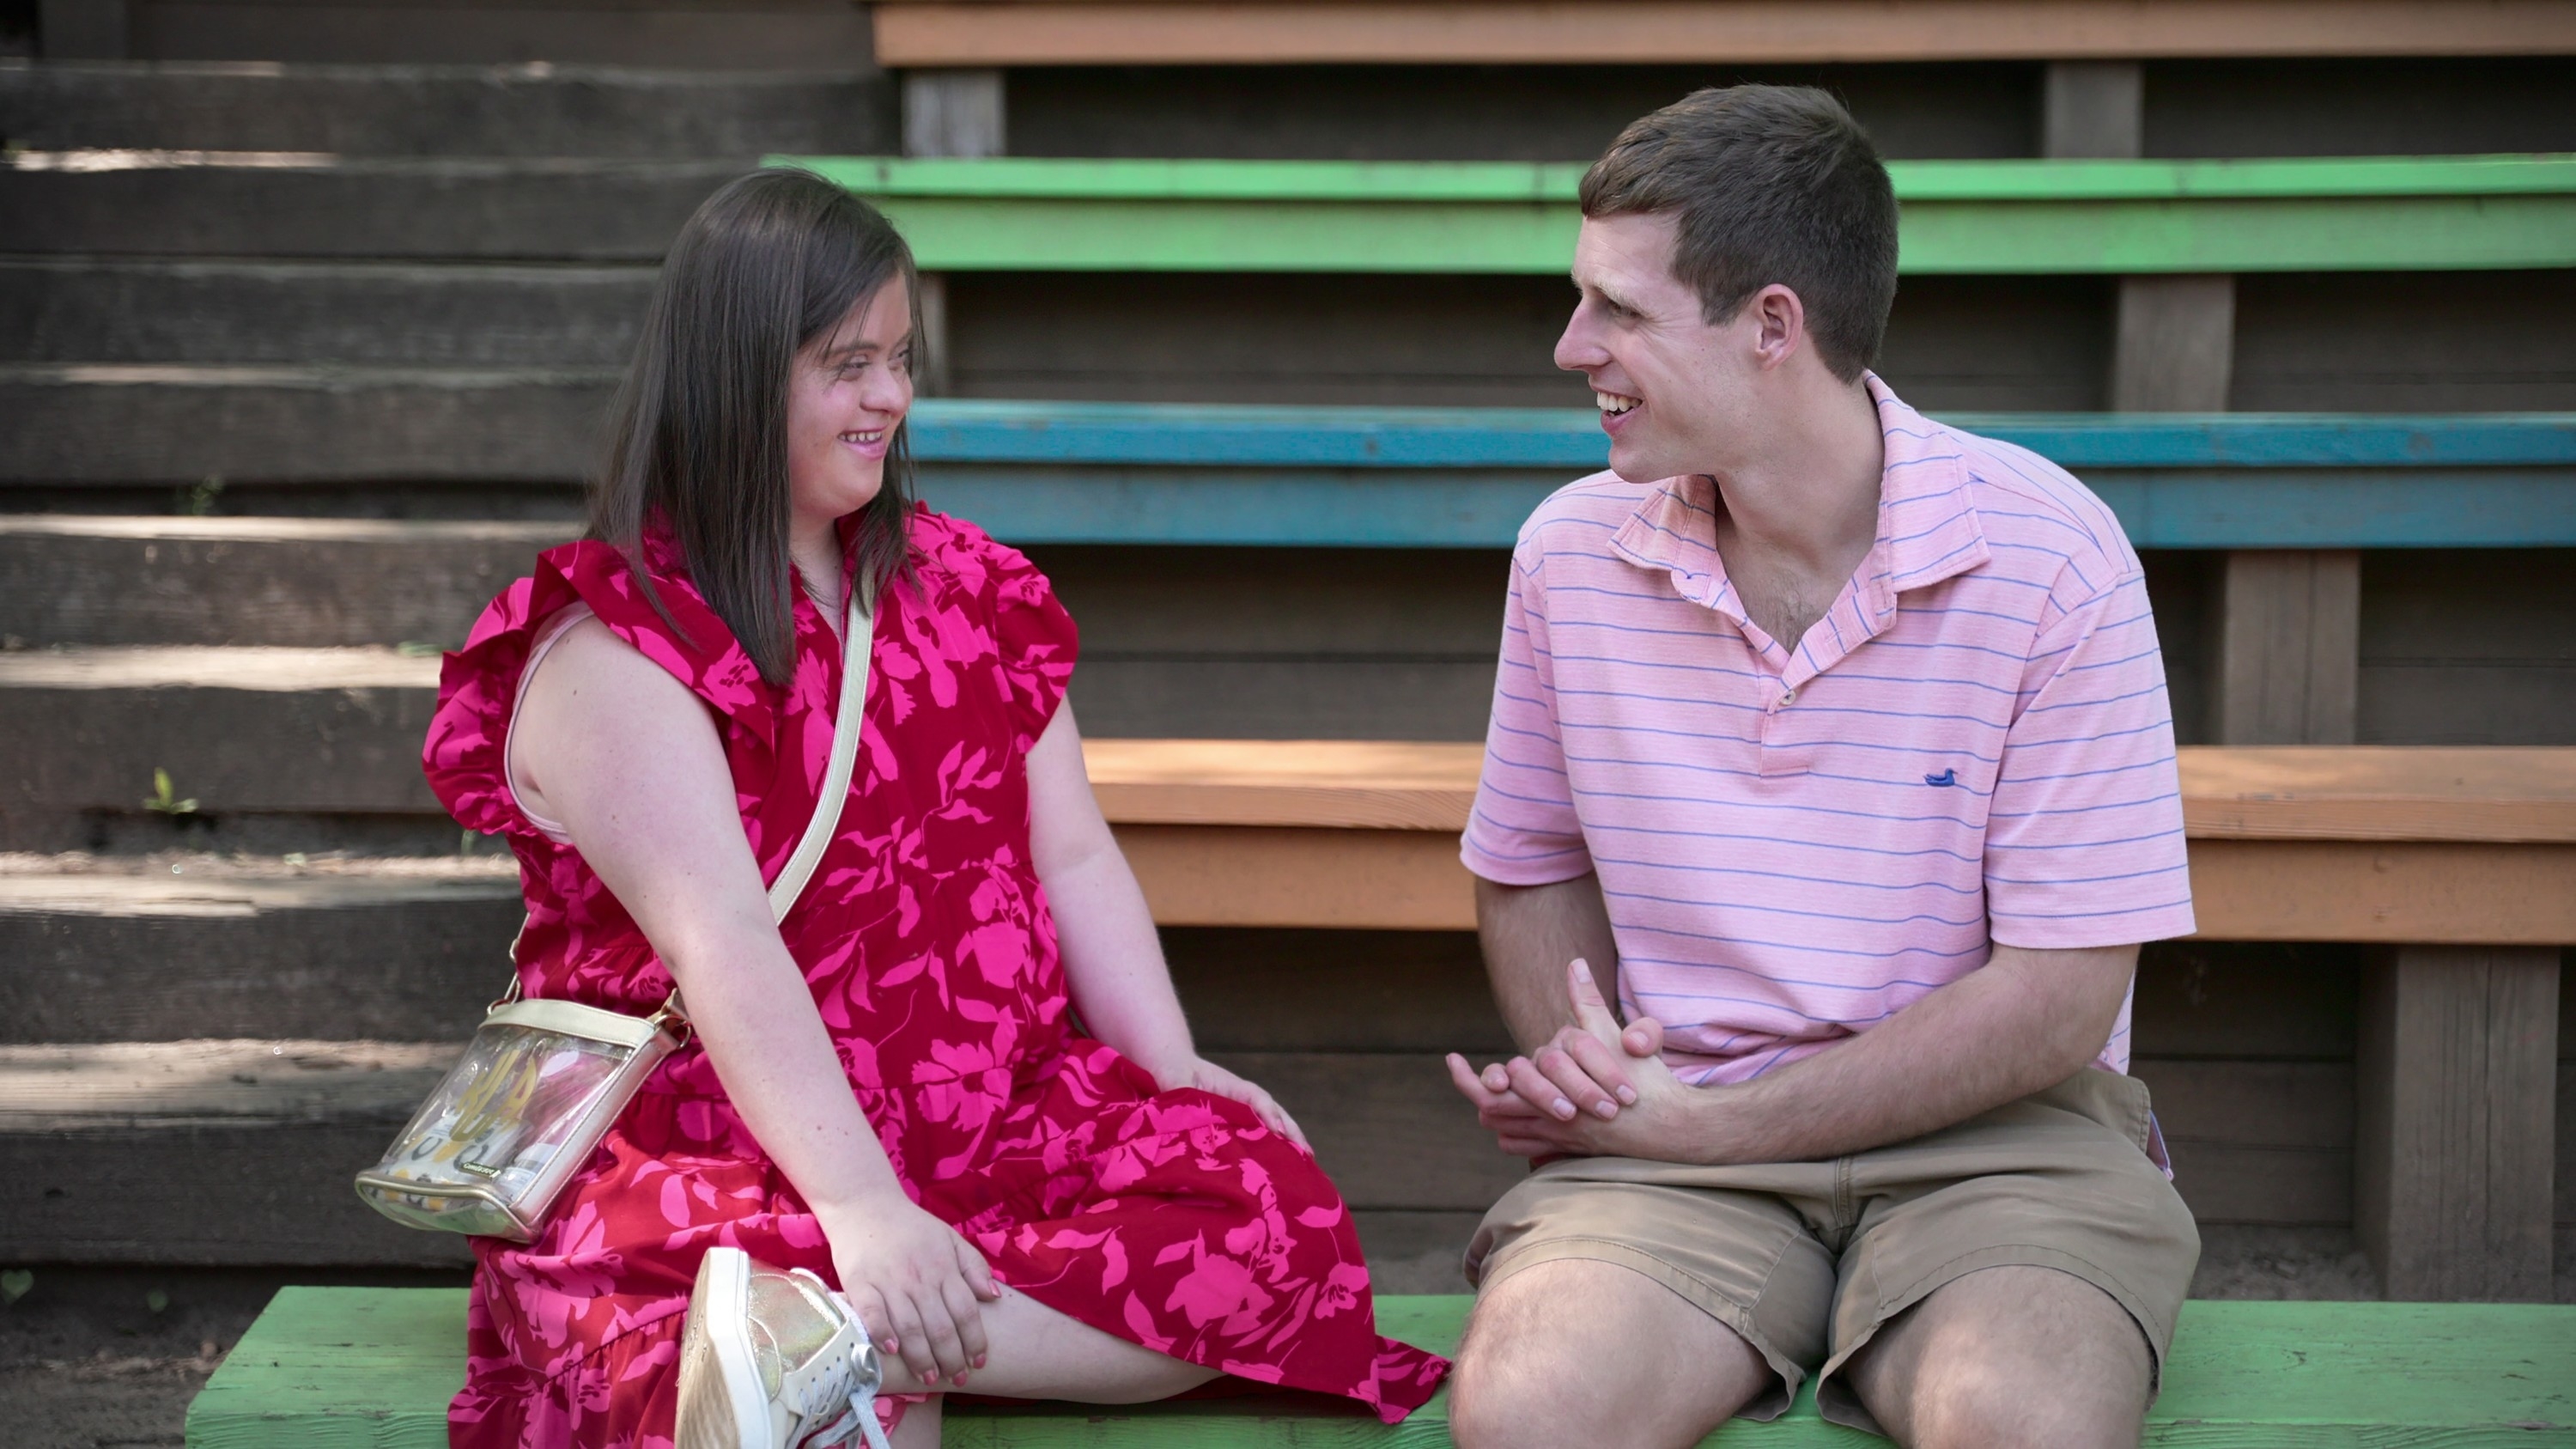 man and woman sitting on park bench smiling at each other